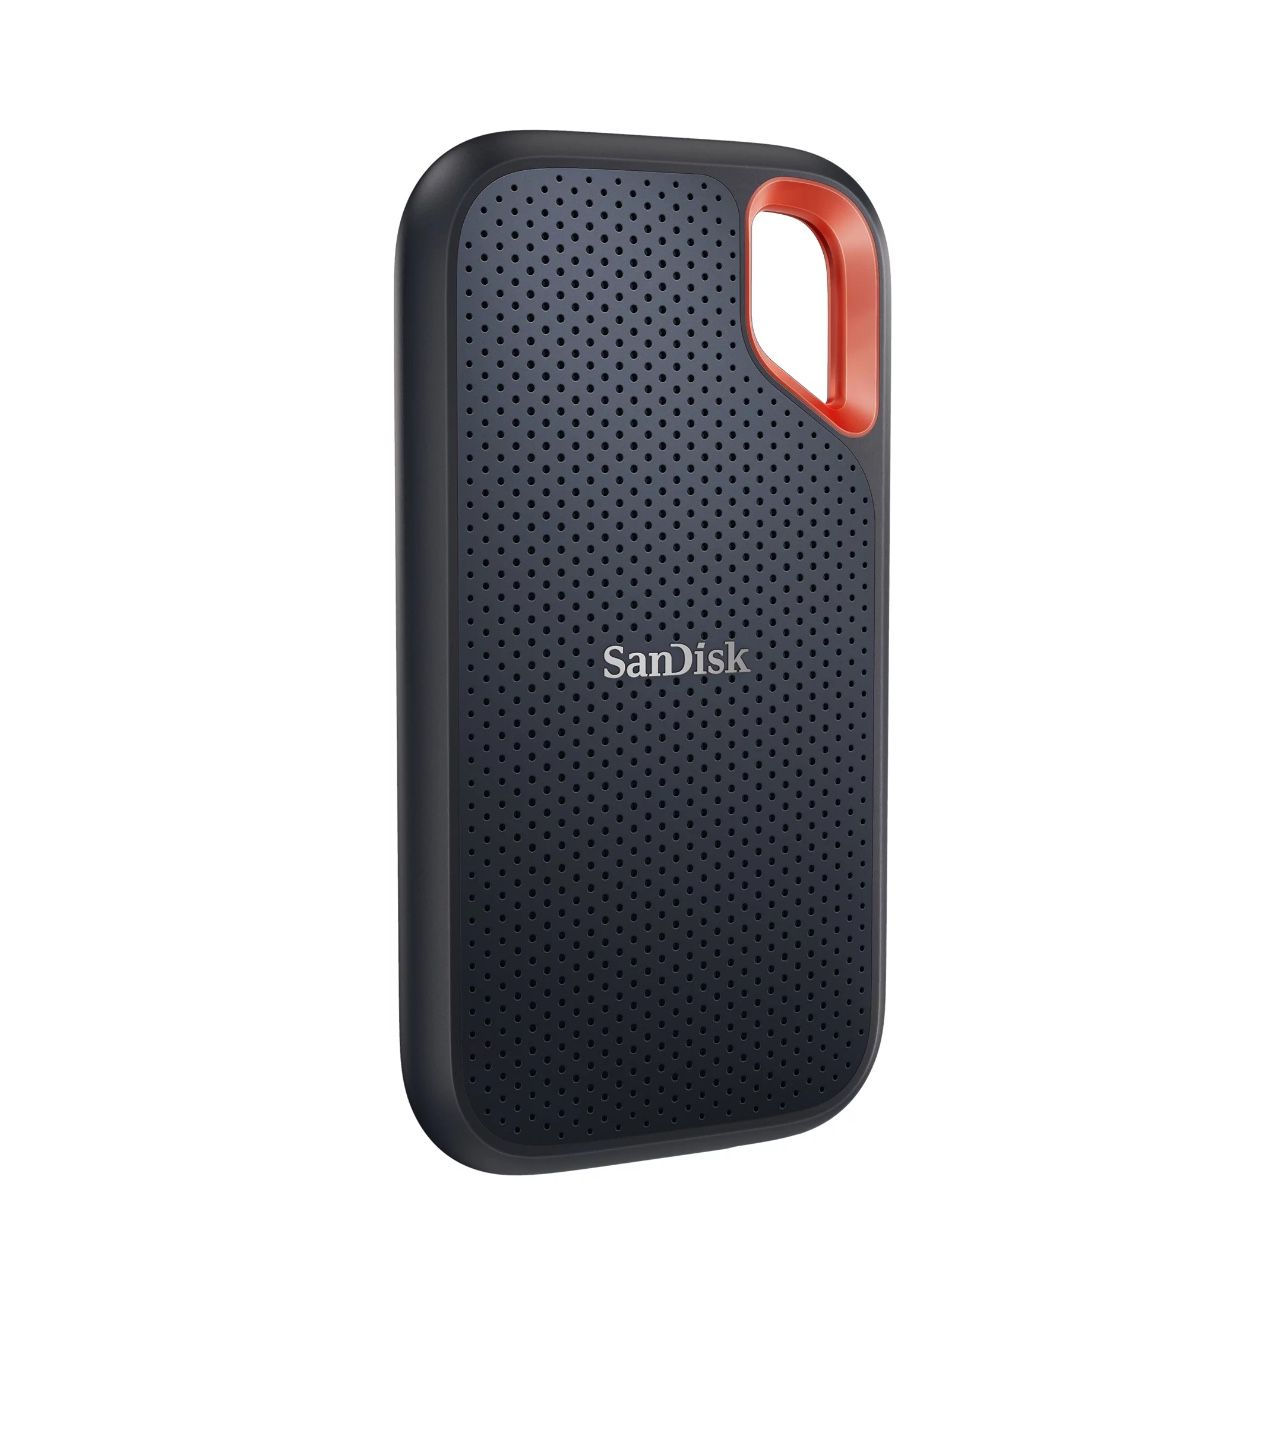 SanDisk Extreme. Portable SSD Price firm this is a new item never opened 